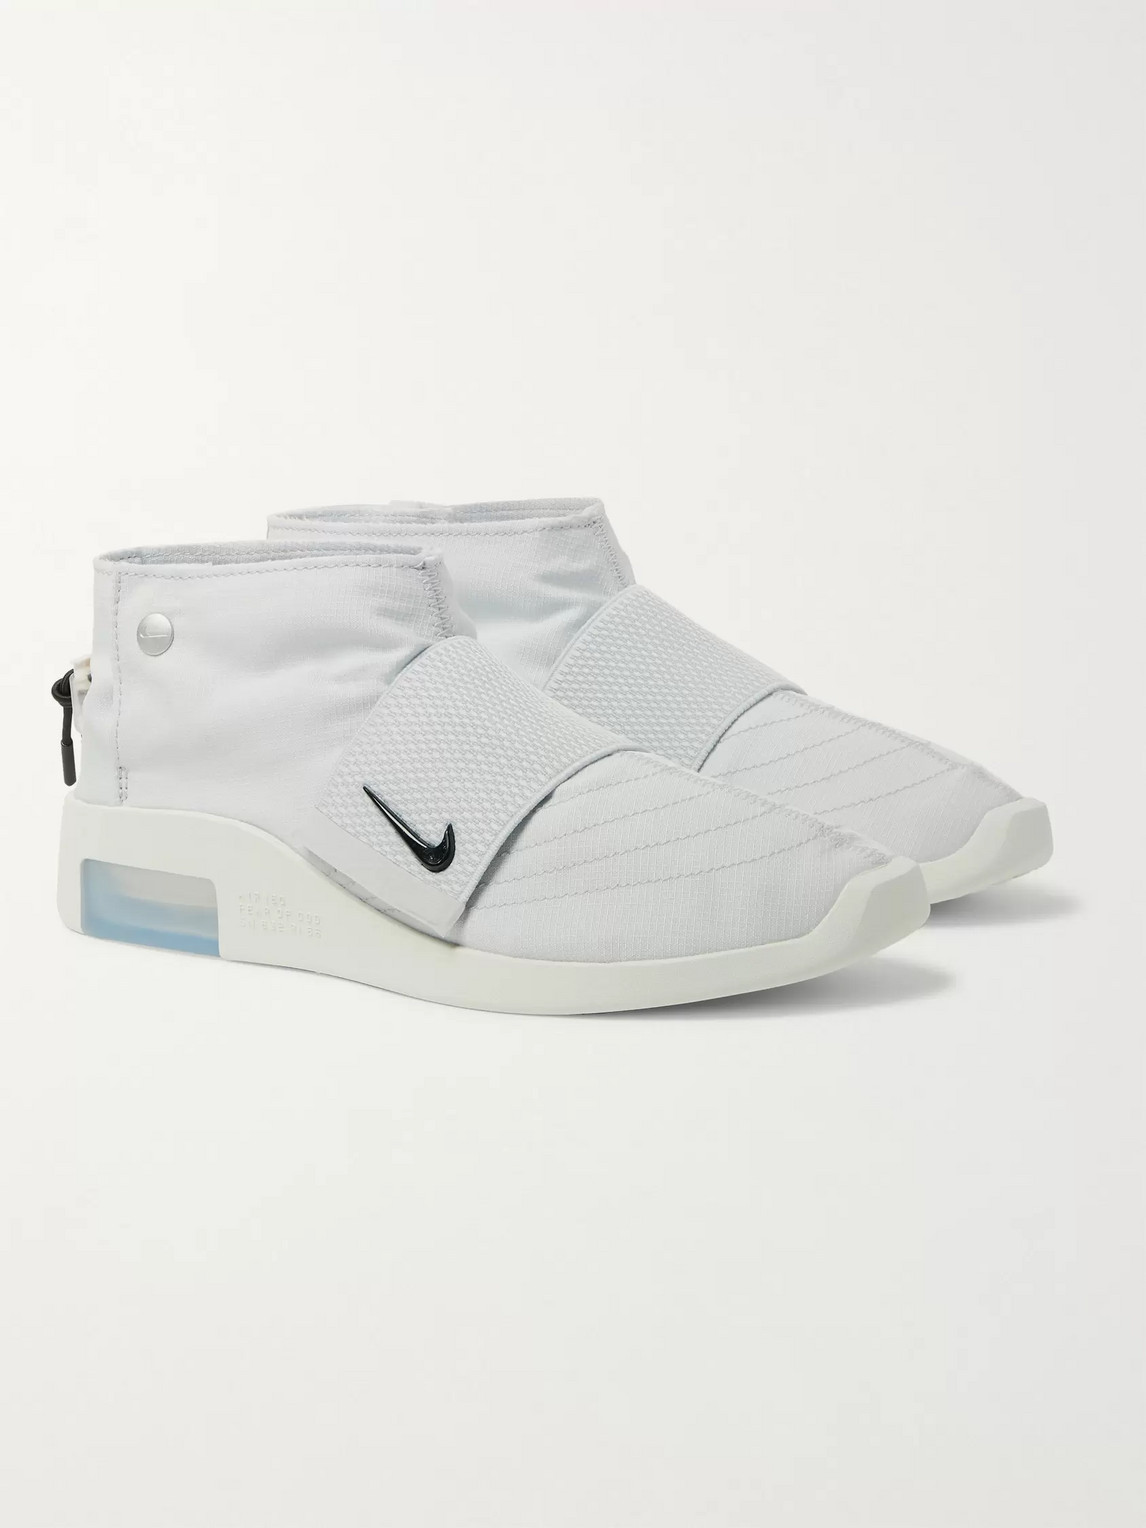 NIKE FEAR OF GOD AIR 1 MOCCASIN RIPSTOP trainers